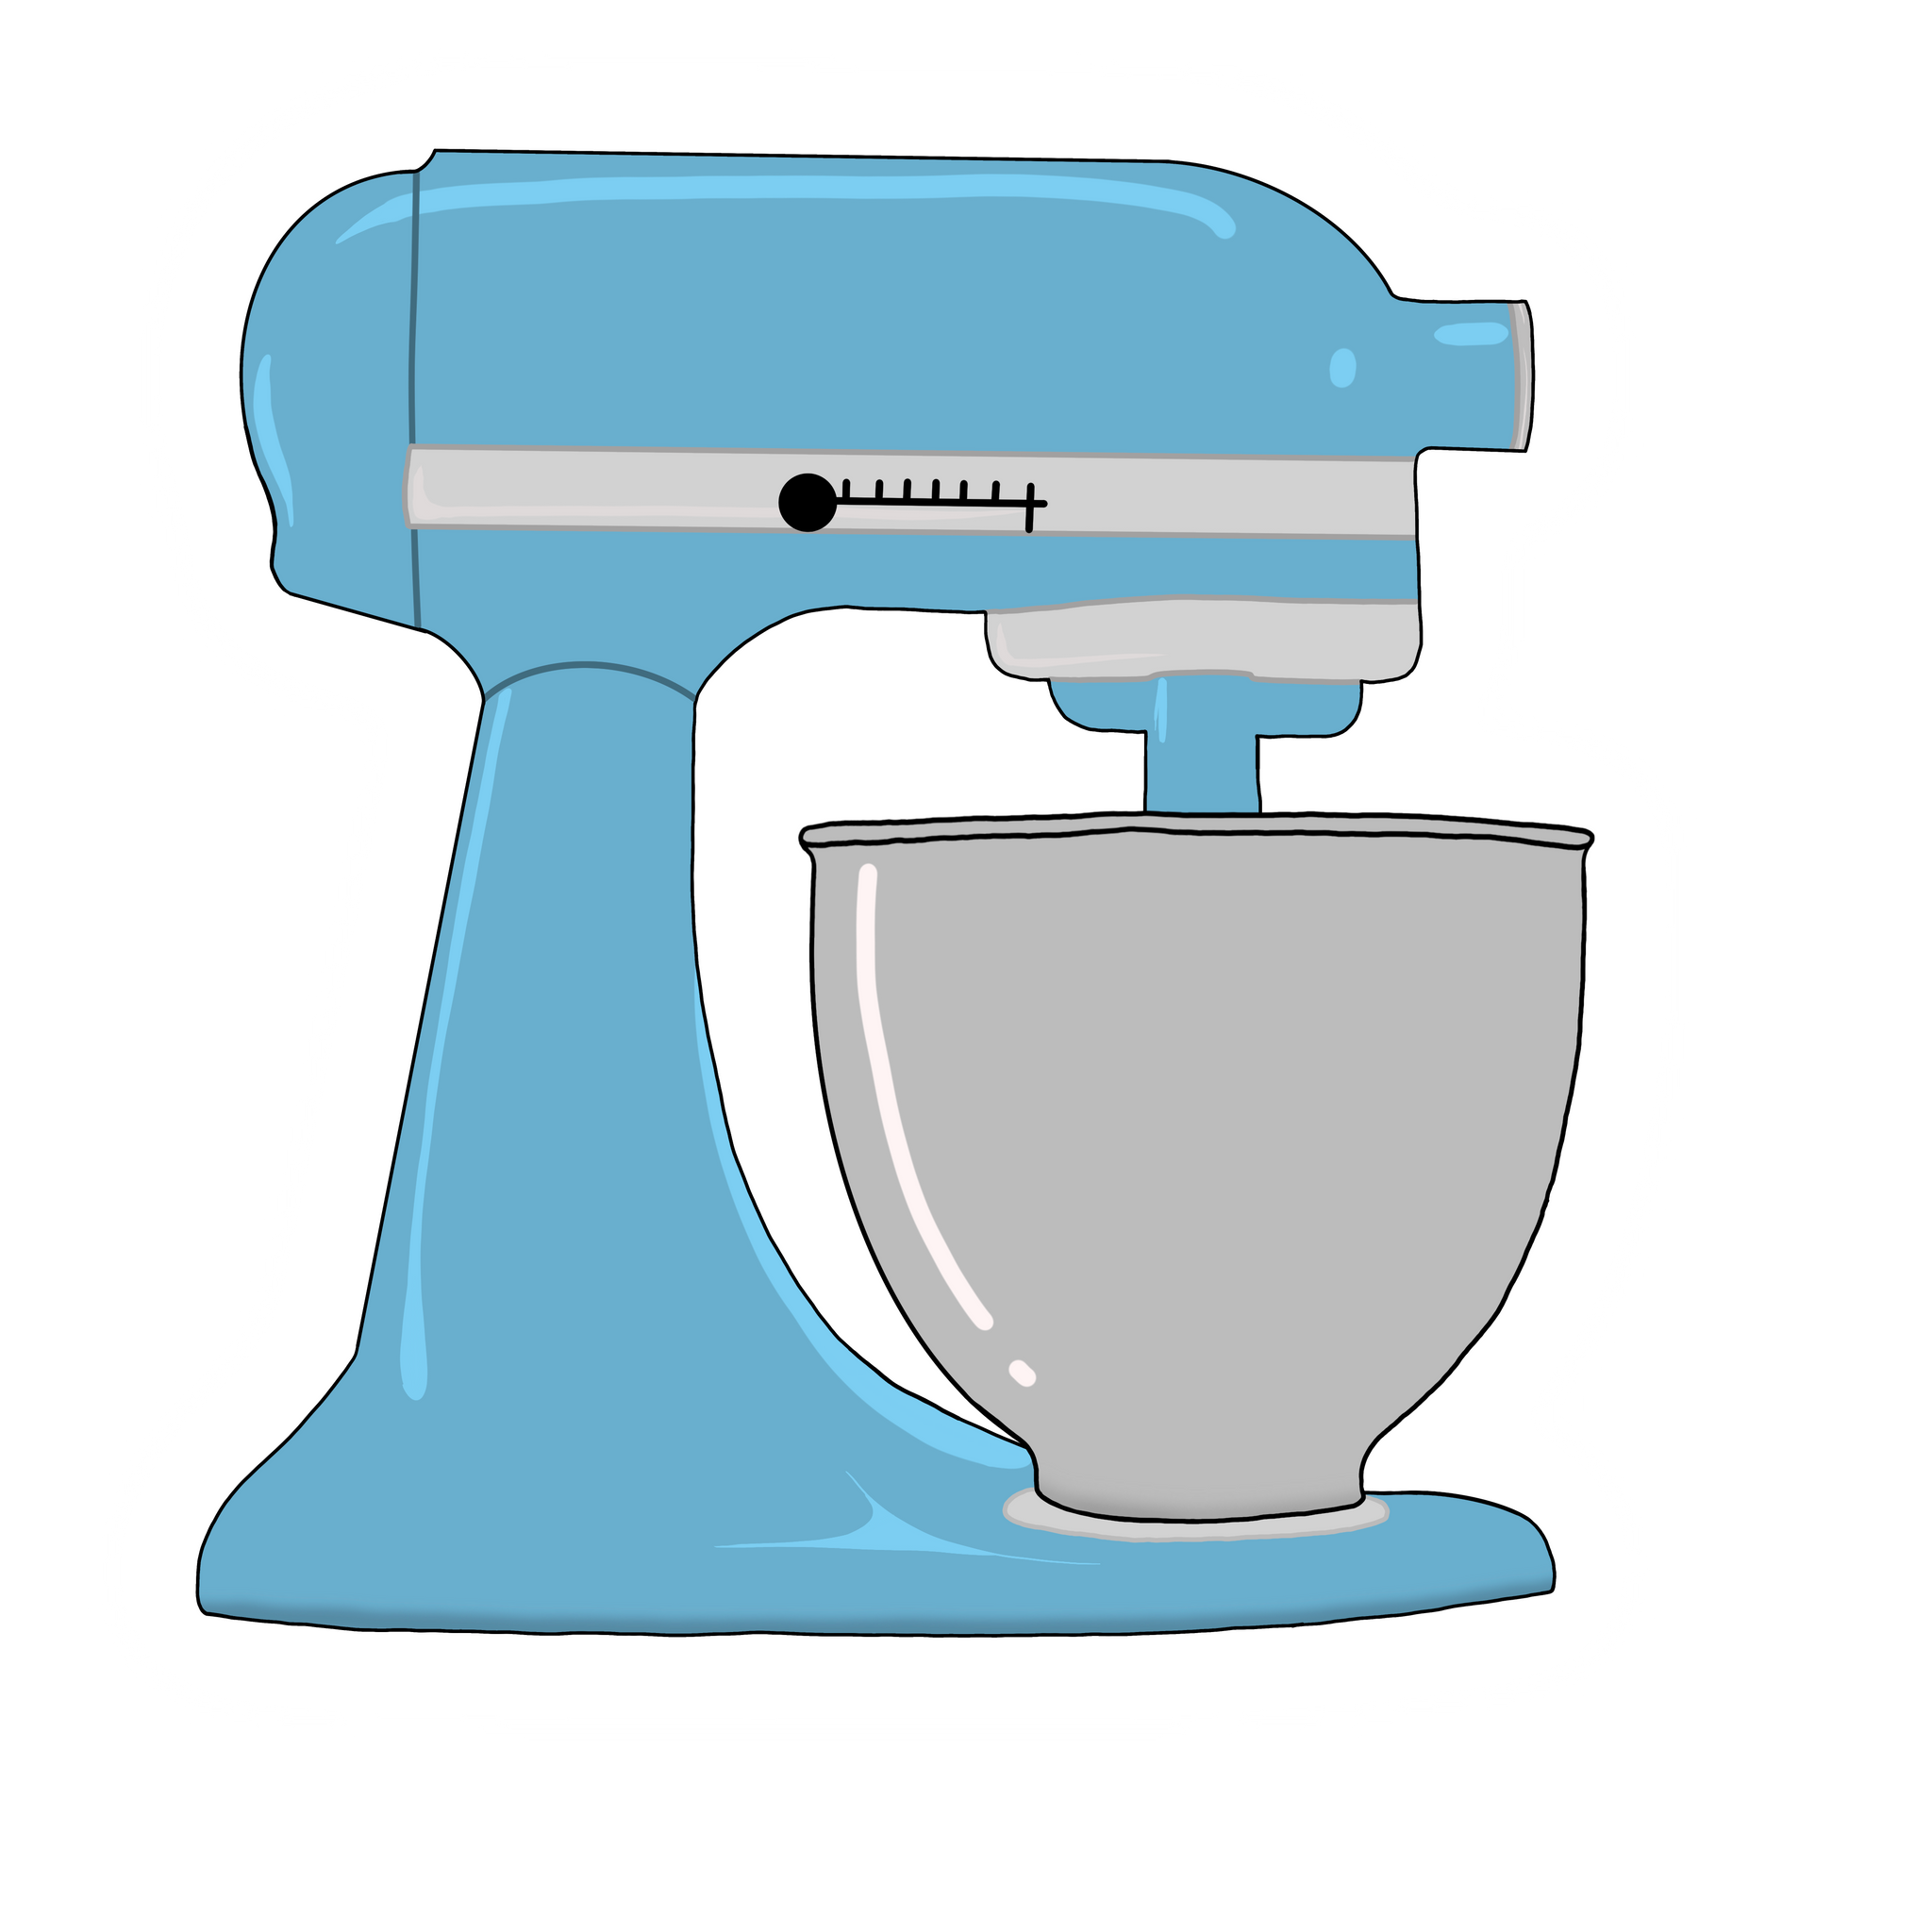 Mixer Decals: All Dressed Up and Ready to Bake - Sweet Dreams and